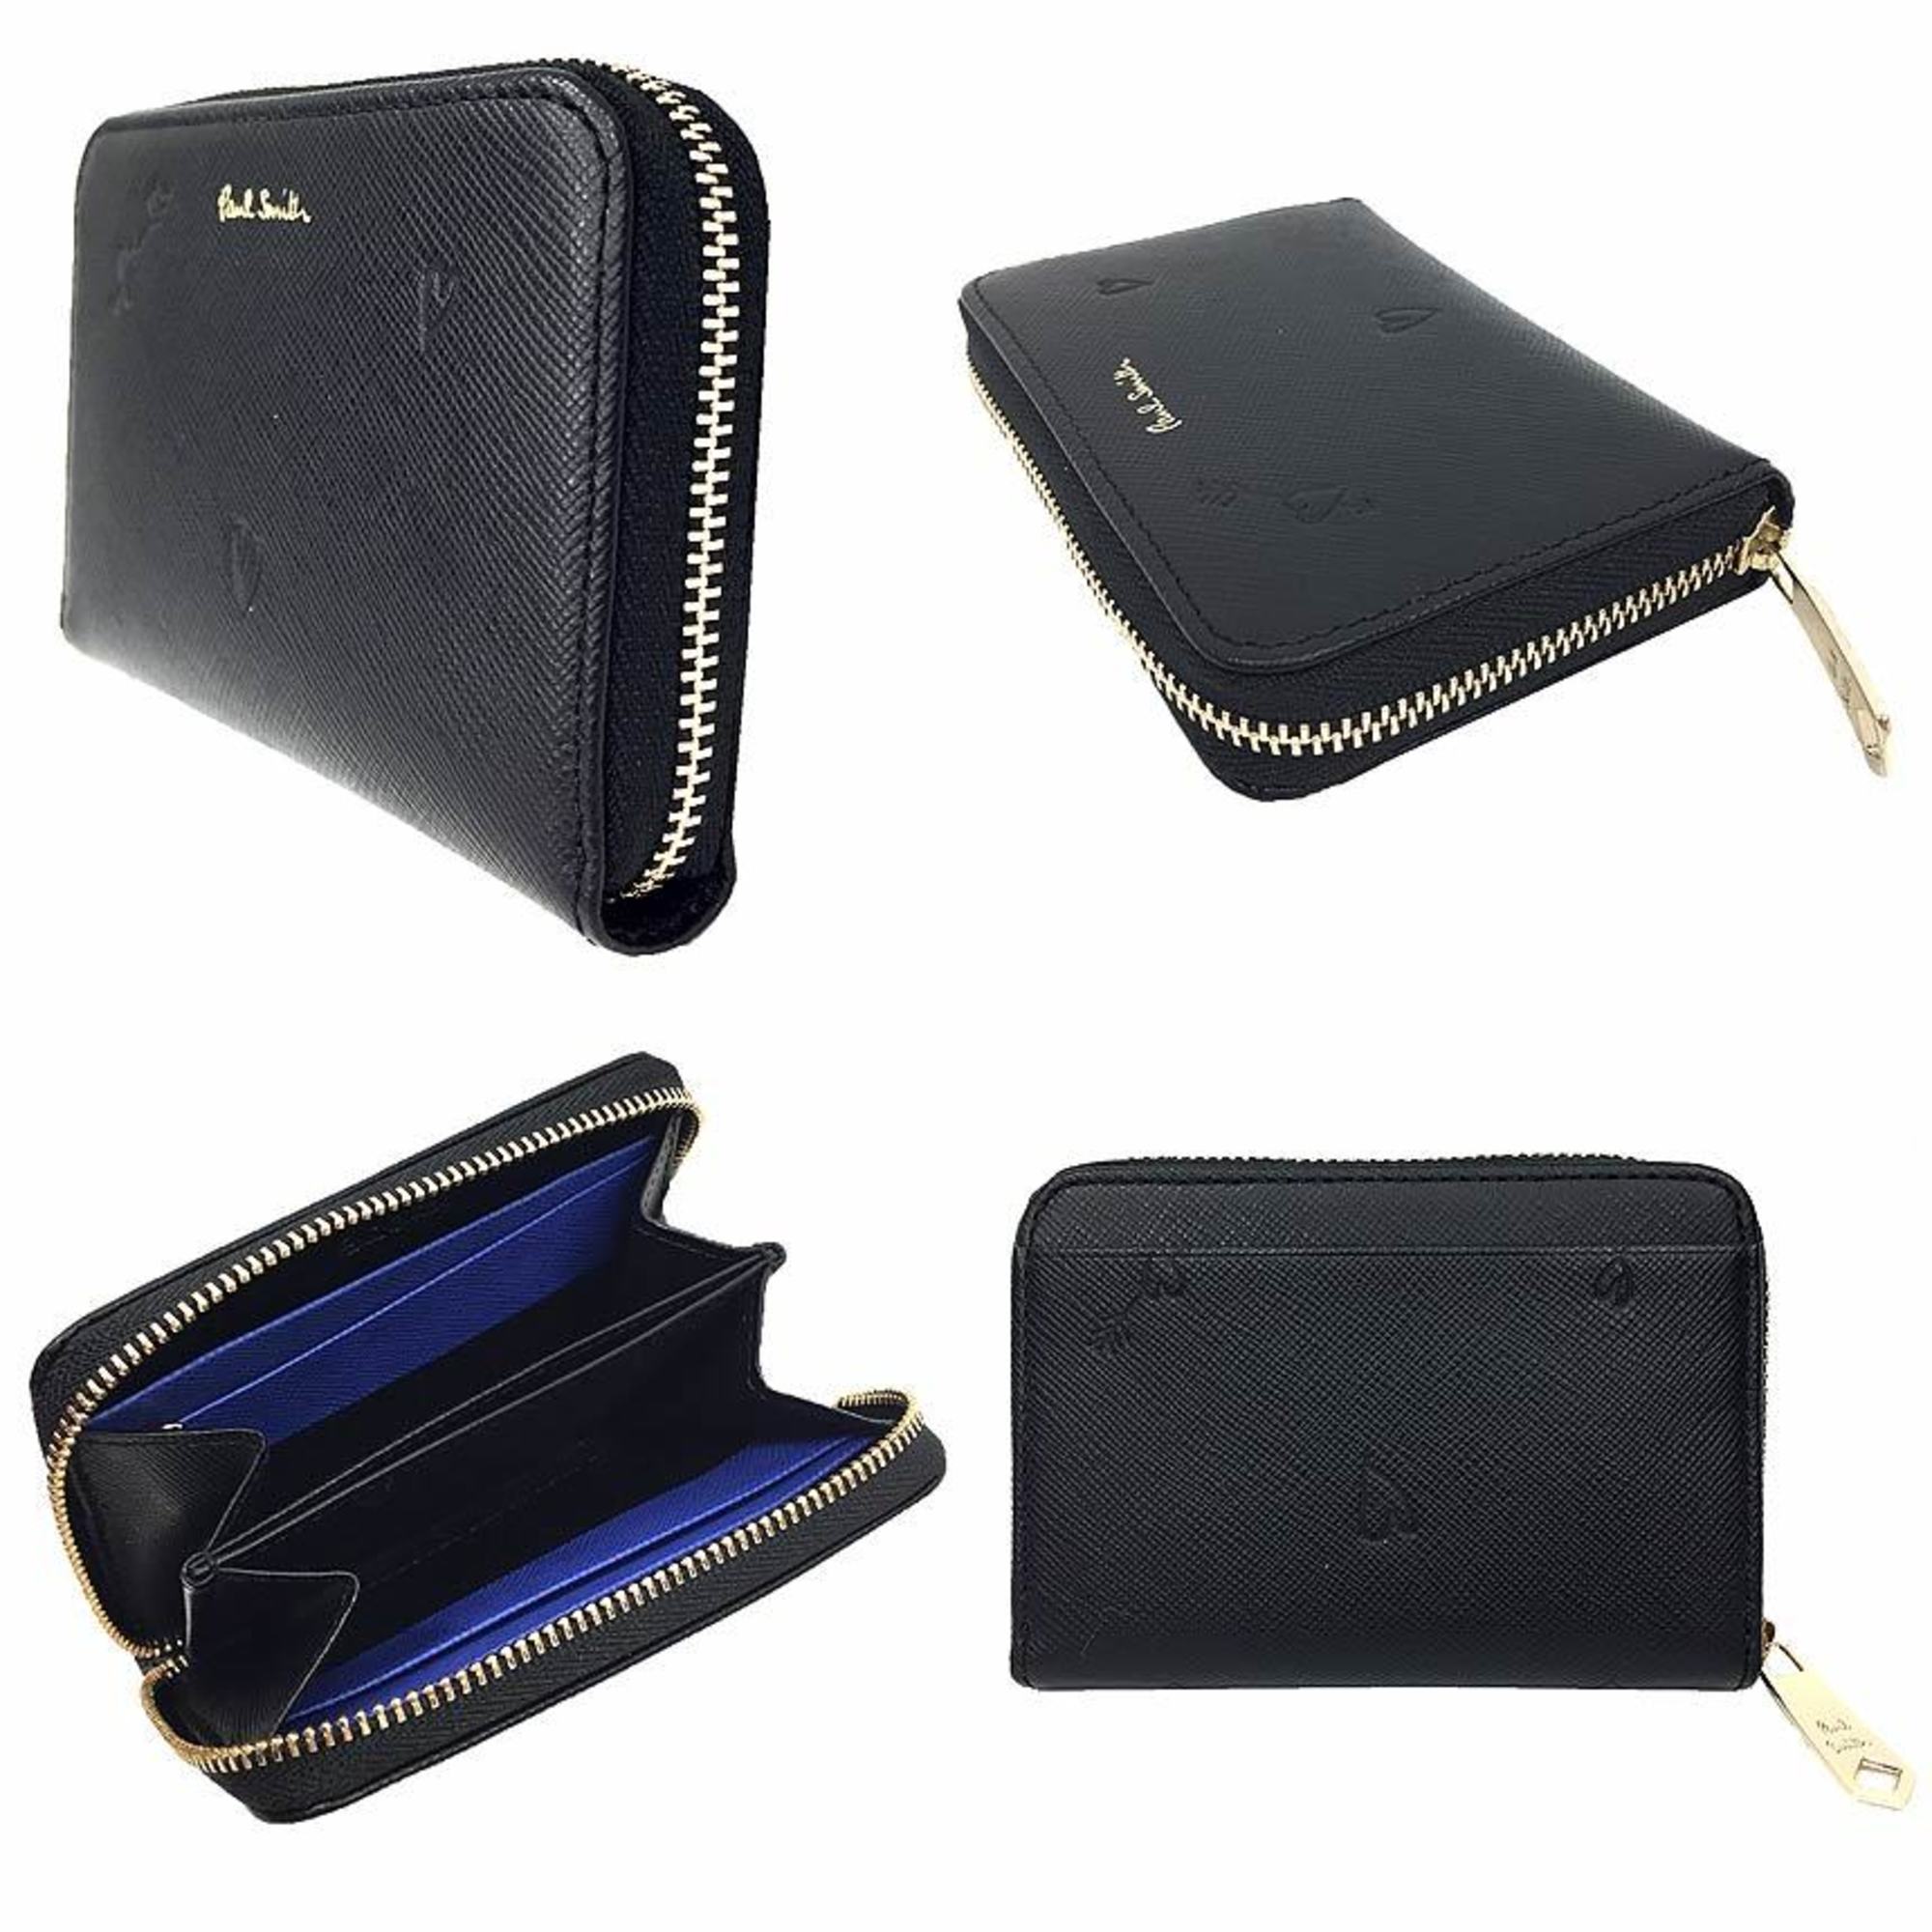 Paul Smith Wallet Coin Purse Case Round PWD792-10 Leather Black Heart Women's aq9342